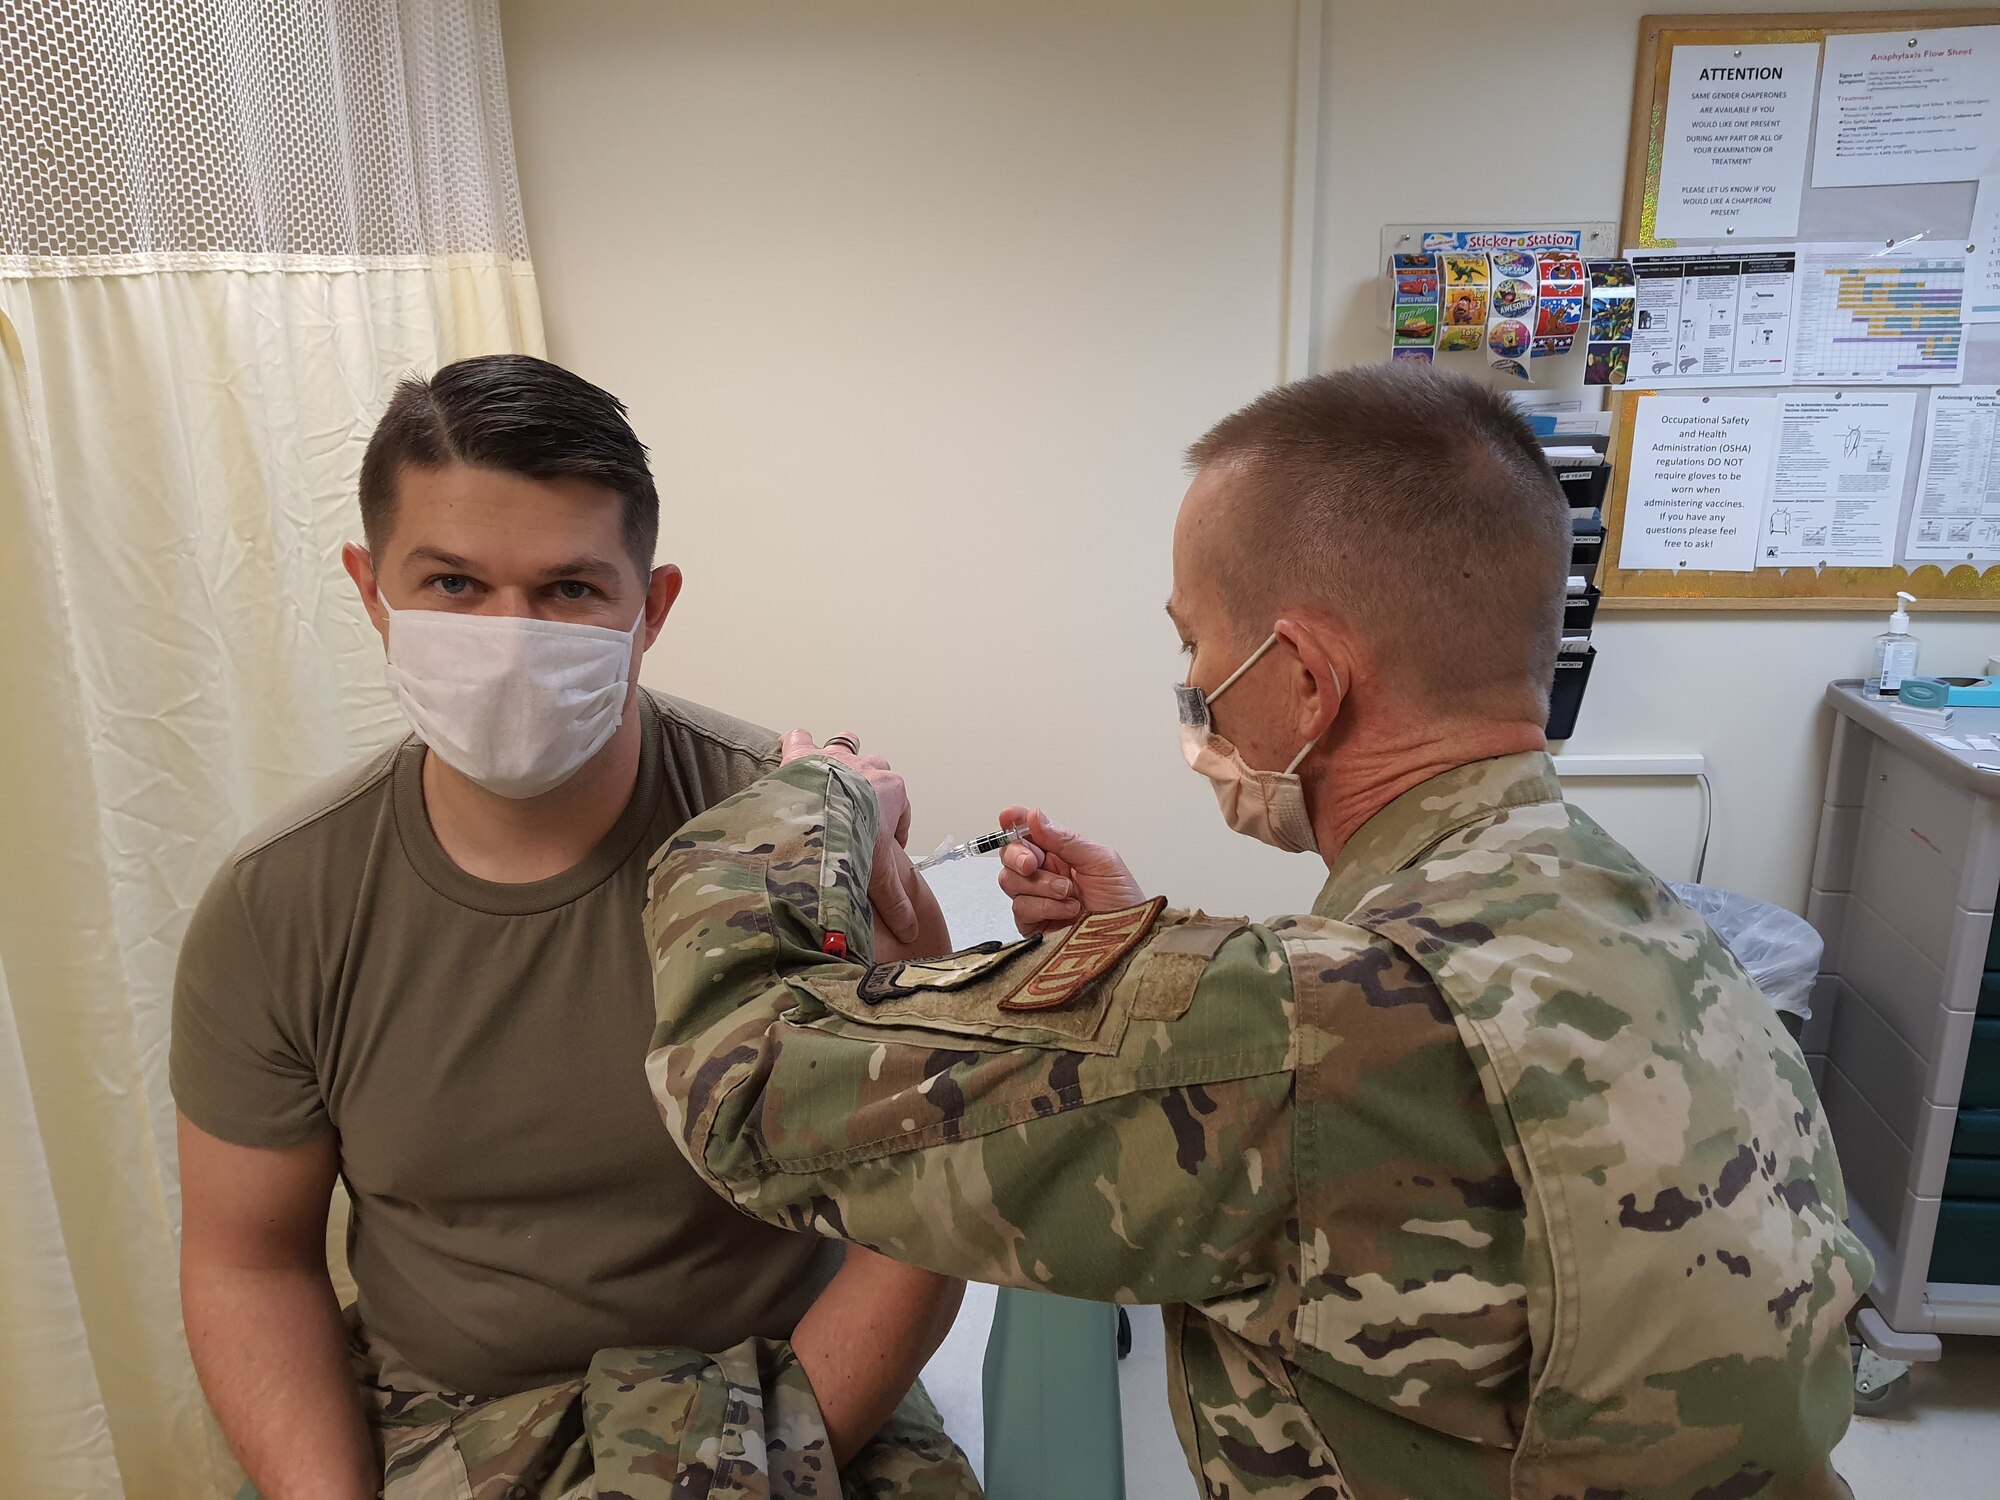 Senior Airman Chris Johns, 403rd Maintenance Squadron sheet metal technician, received his flu shot vaccine from Lt. Col. Randy McKee, 403rd Aeromedical Staging Squadron nurse, Feb. 6, 2021. The 403rd ASTS is responsible for ensuring that the Reserve Citizen Airmen of the 403rd Wing are current or 'green' on their Individual Medical Readiness status; which includes providing immunizations, optometry services, dental x-rays and exams, lab draws, audiograms, and physicals. (U.S. Air Force photo by Master Sgt. Jessica Kendziorek/ photo permission granted by Senior Airman Chris Johns)